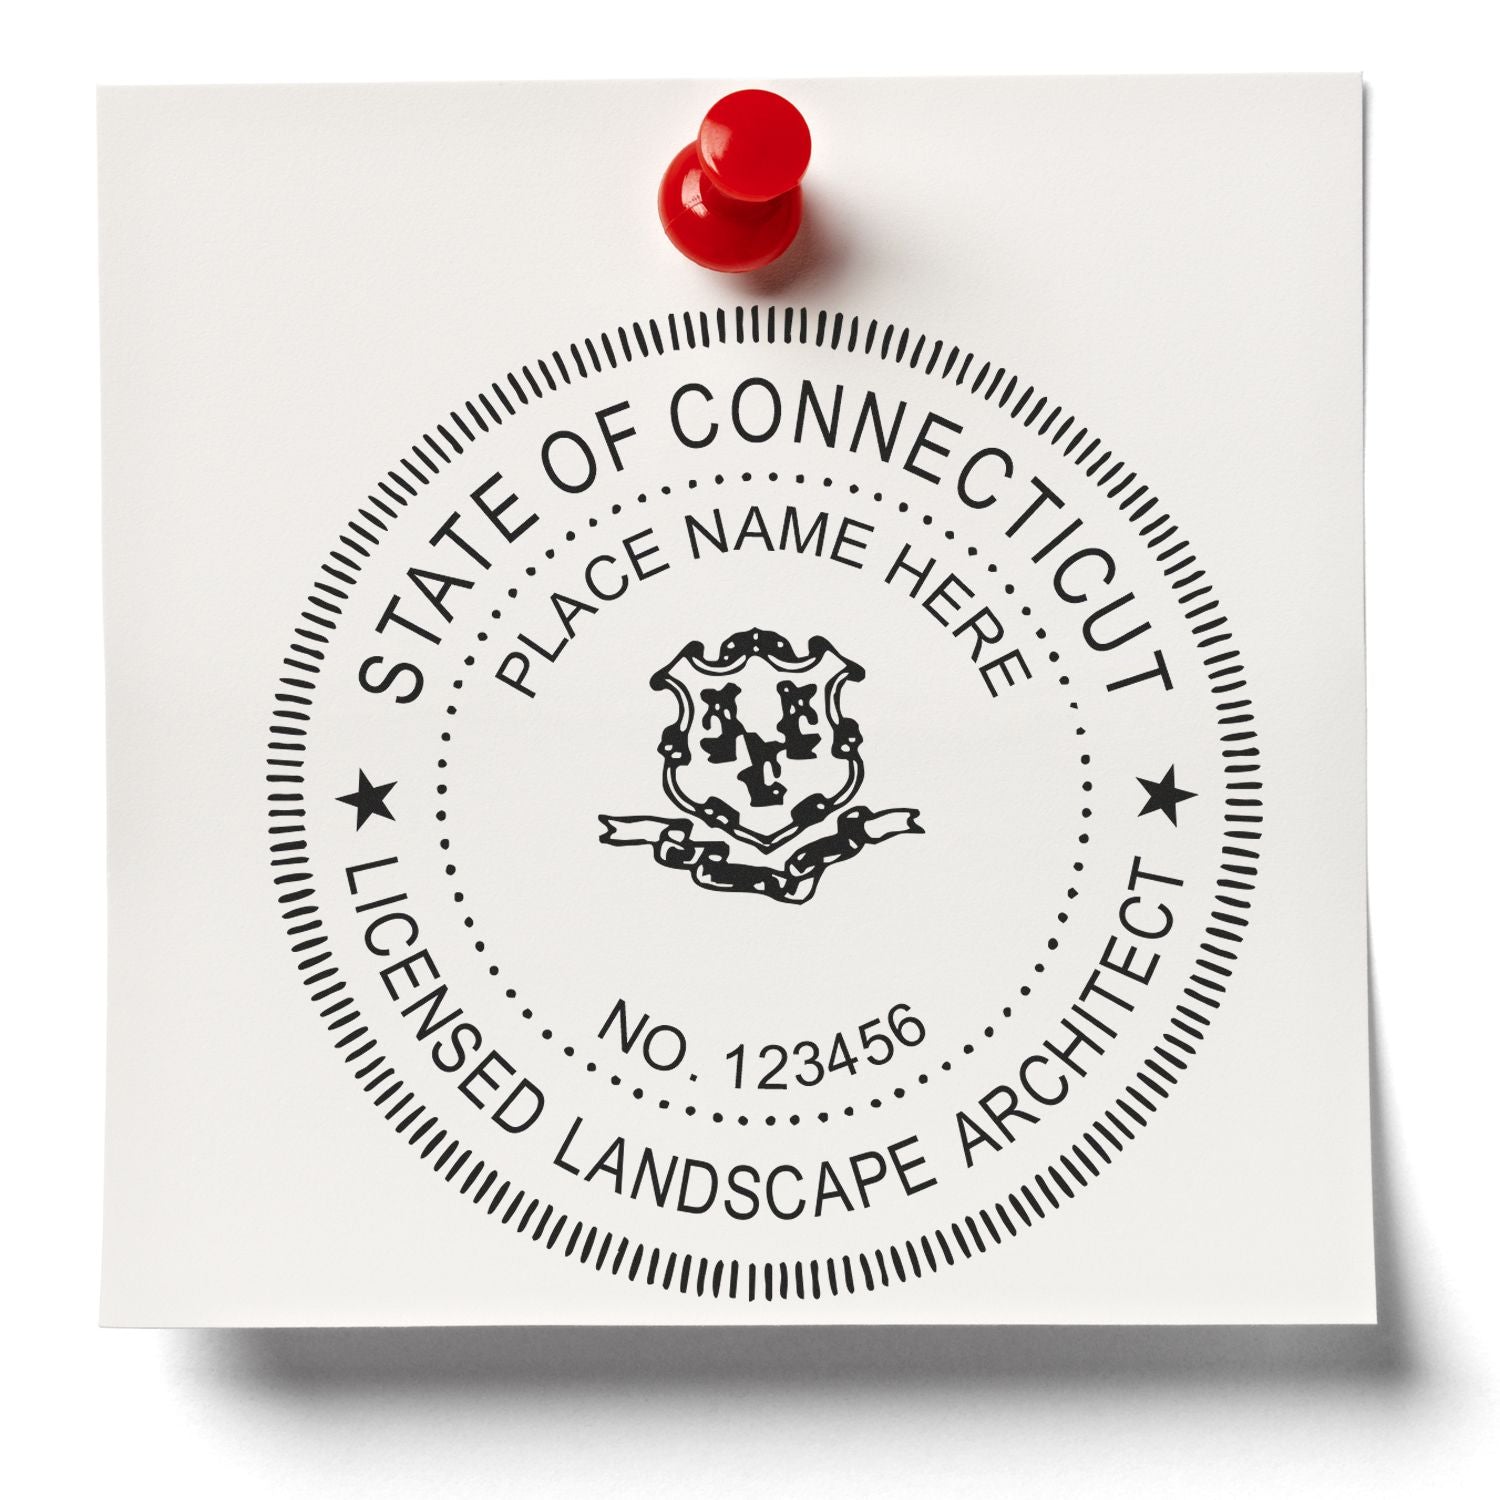 Premium MaxLight Pre-Inked Connecticut Landscape Architectural Stamp in use photo showing a stamped imprint of the Premium MaxLight Pre-Inked Connecticut Landscape Architectural Stamp